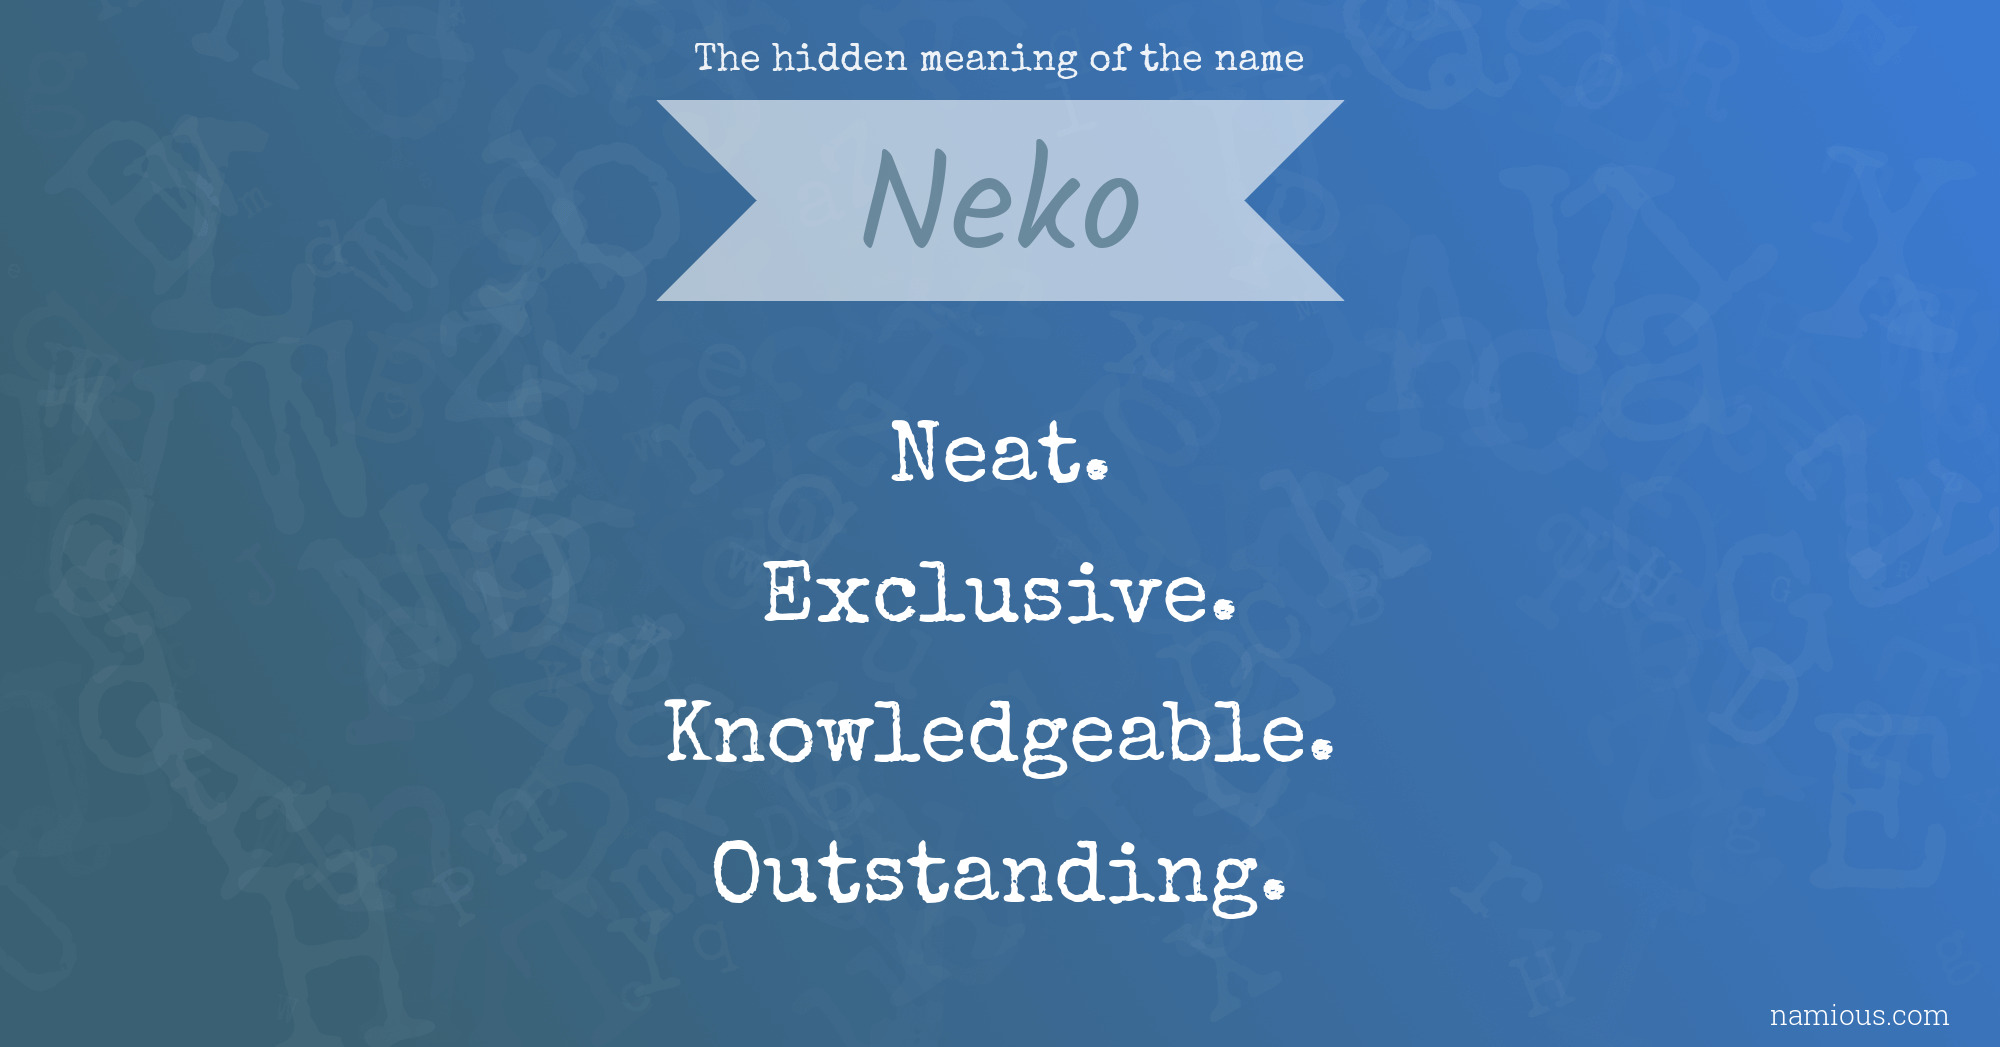 The hidden meaning of the name Neko